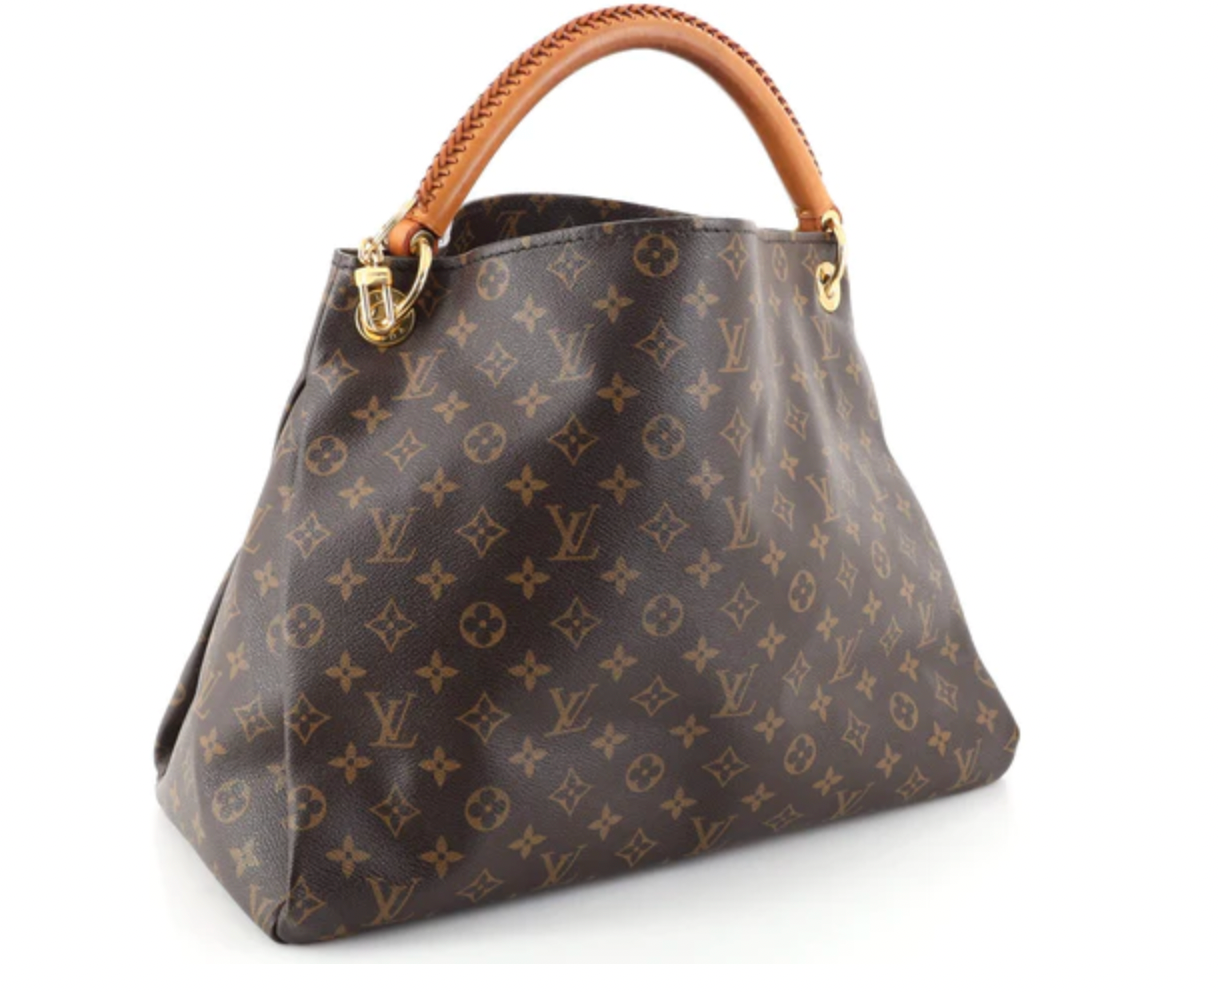 Suggestions for bags in the style of the discontinued LV Montaigne